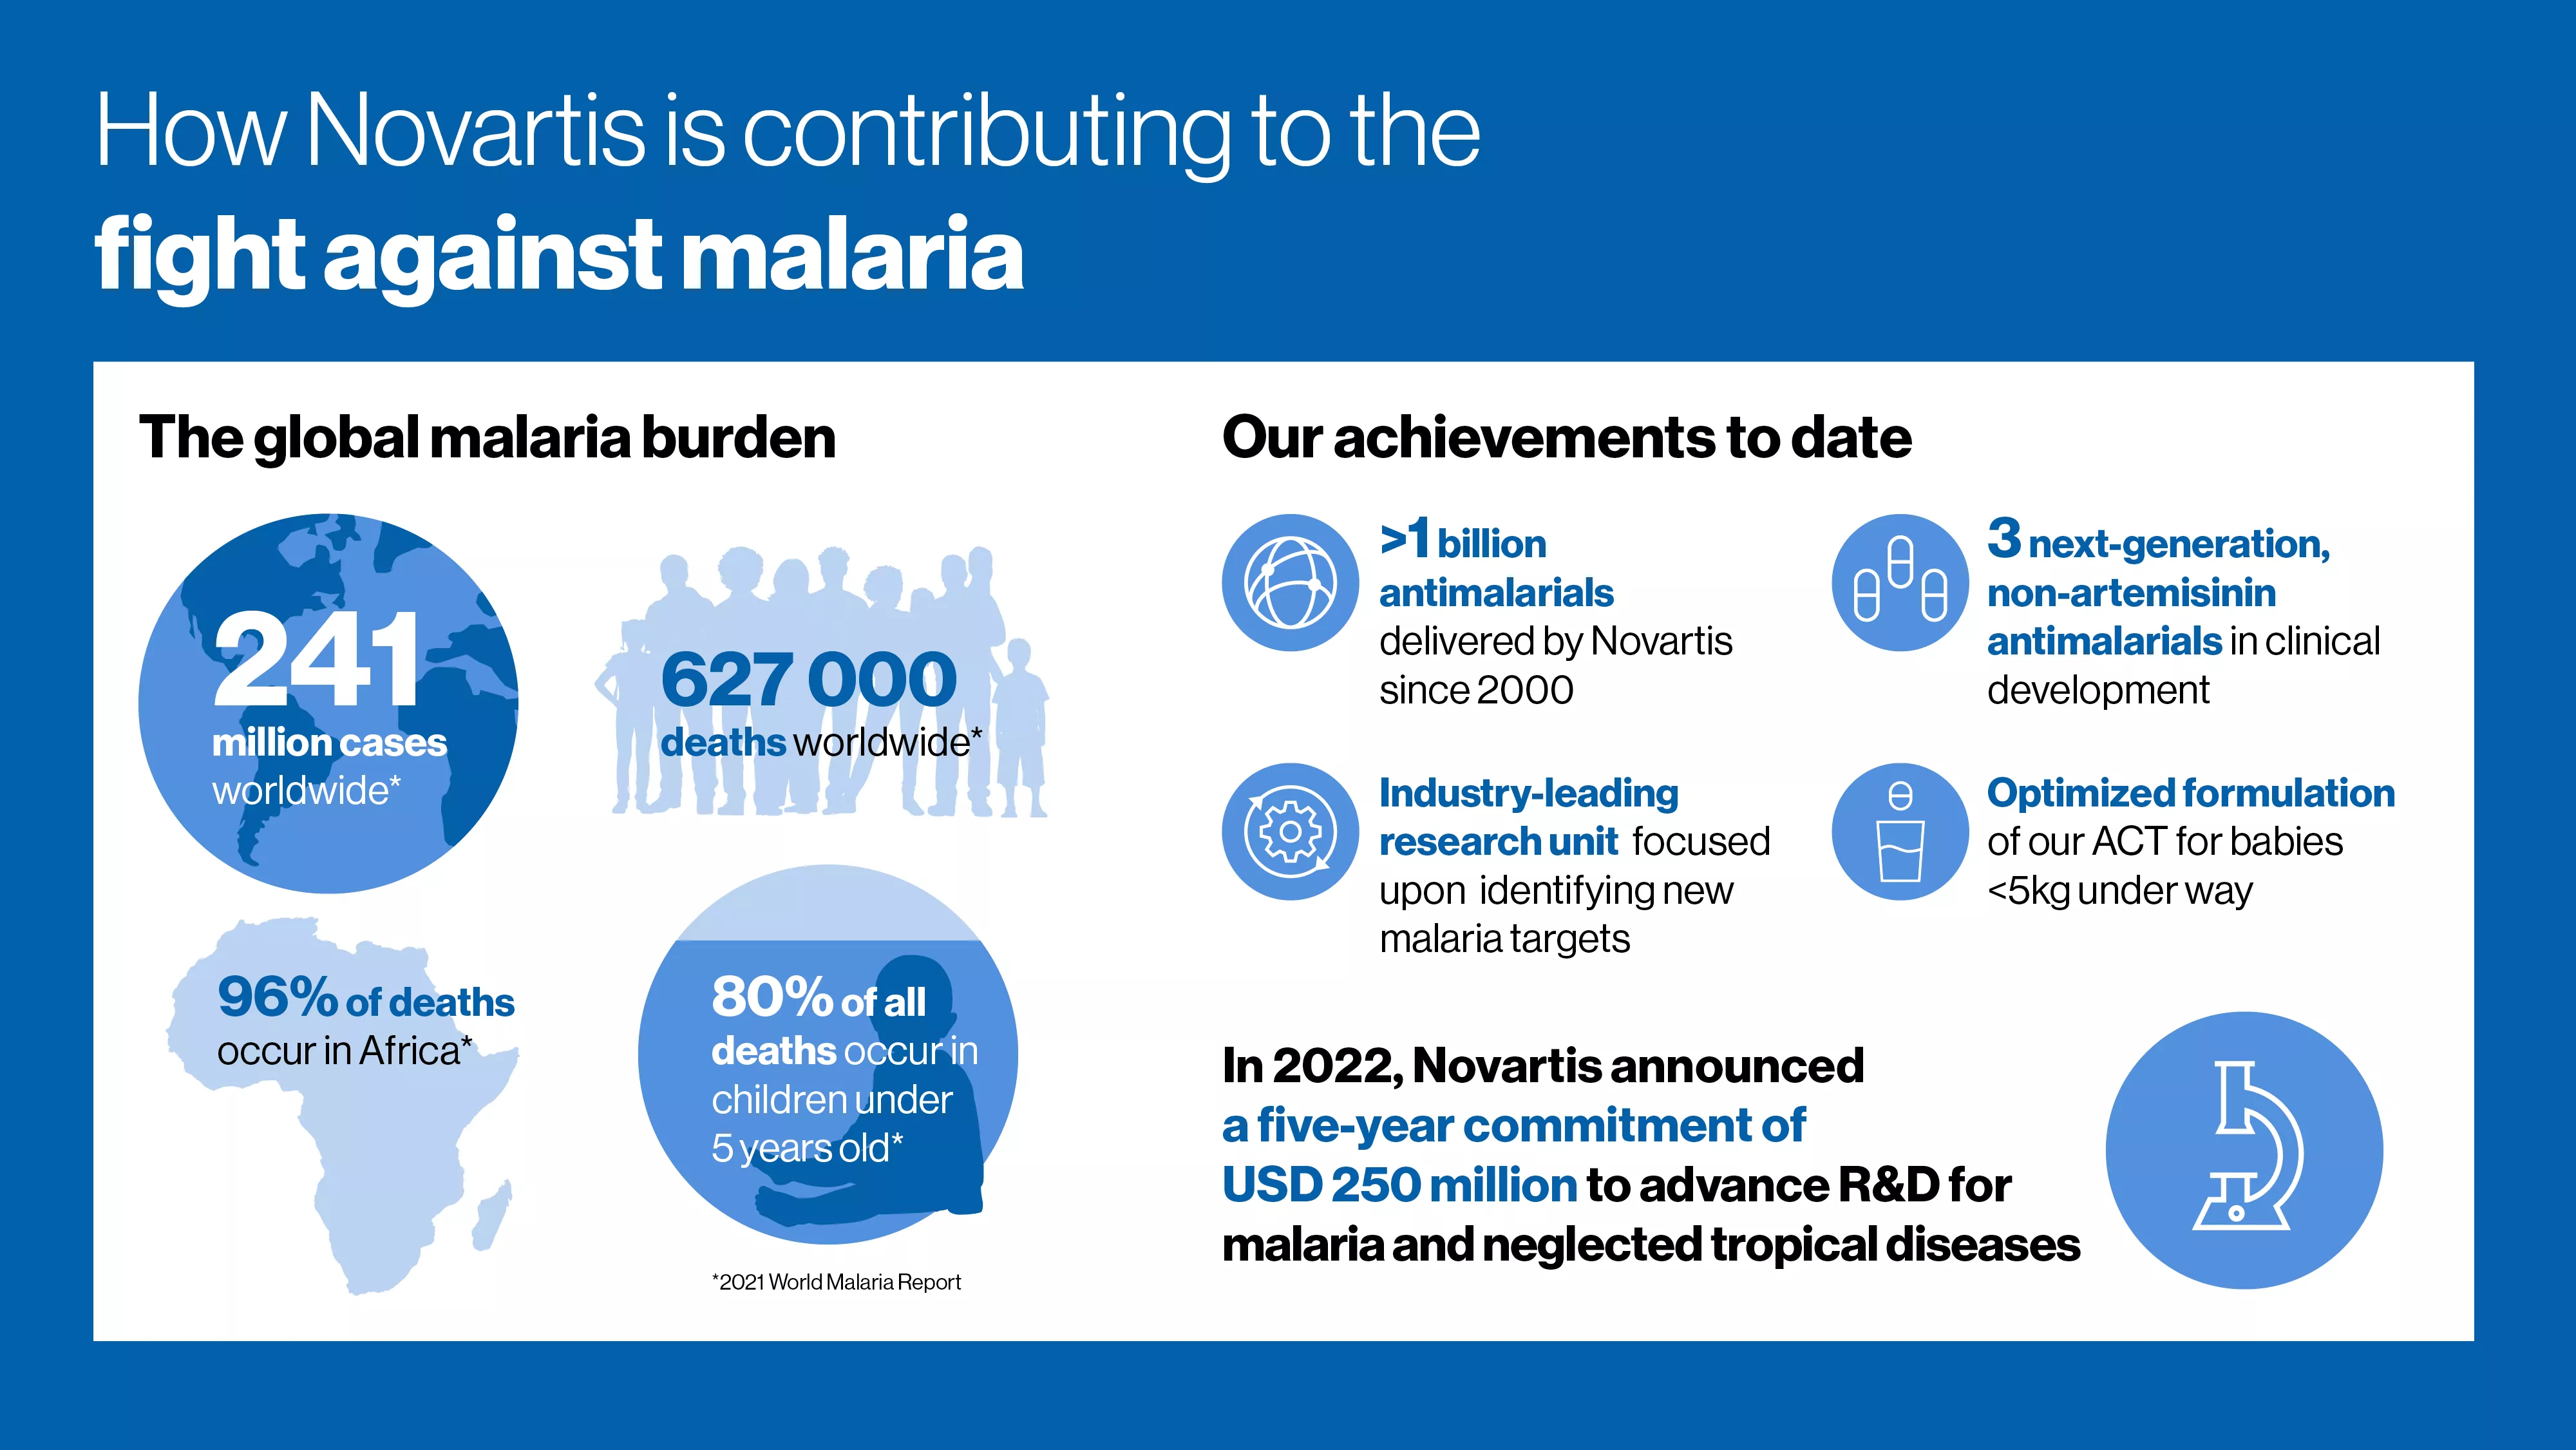 How Novartis is contributing to the fight against malaria